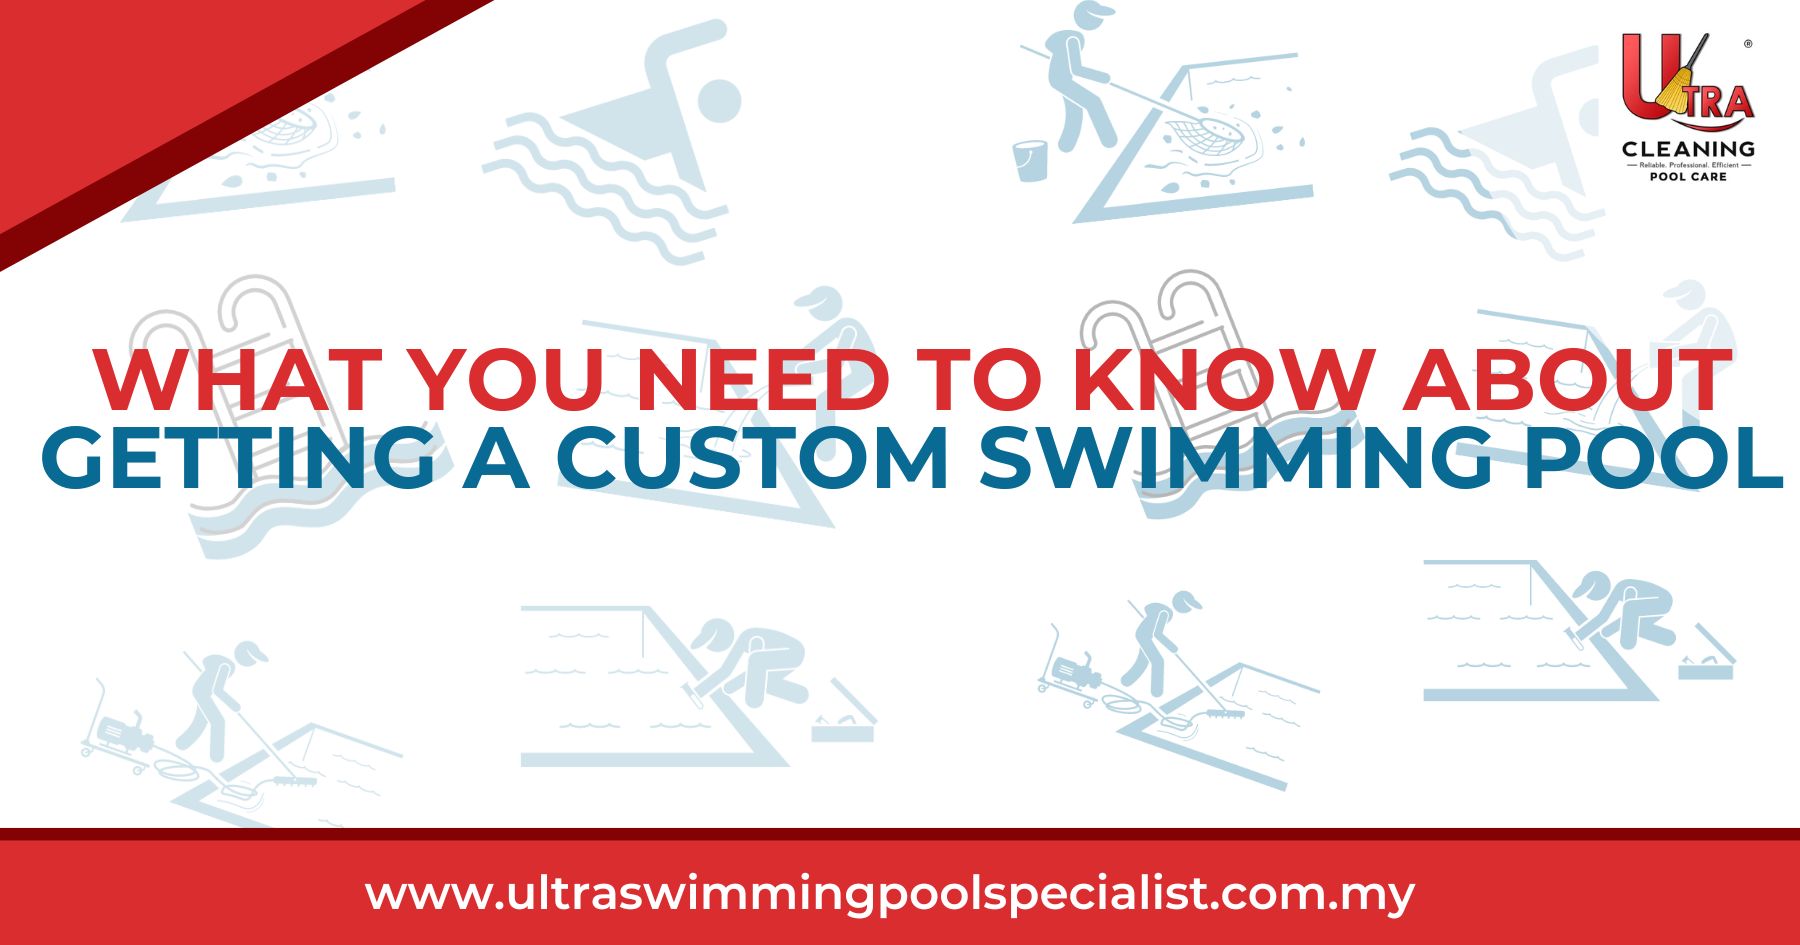 What You Need to Know About Getting a Custom Swimming Pool